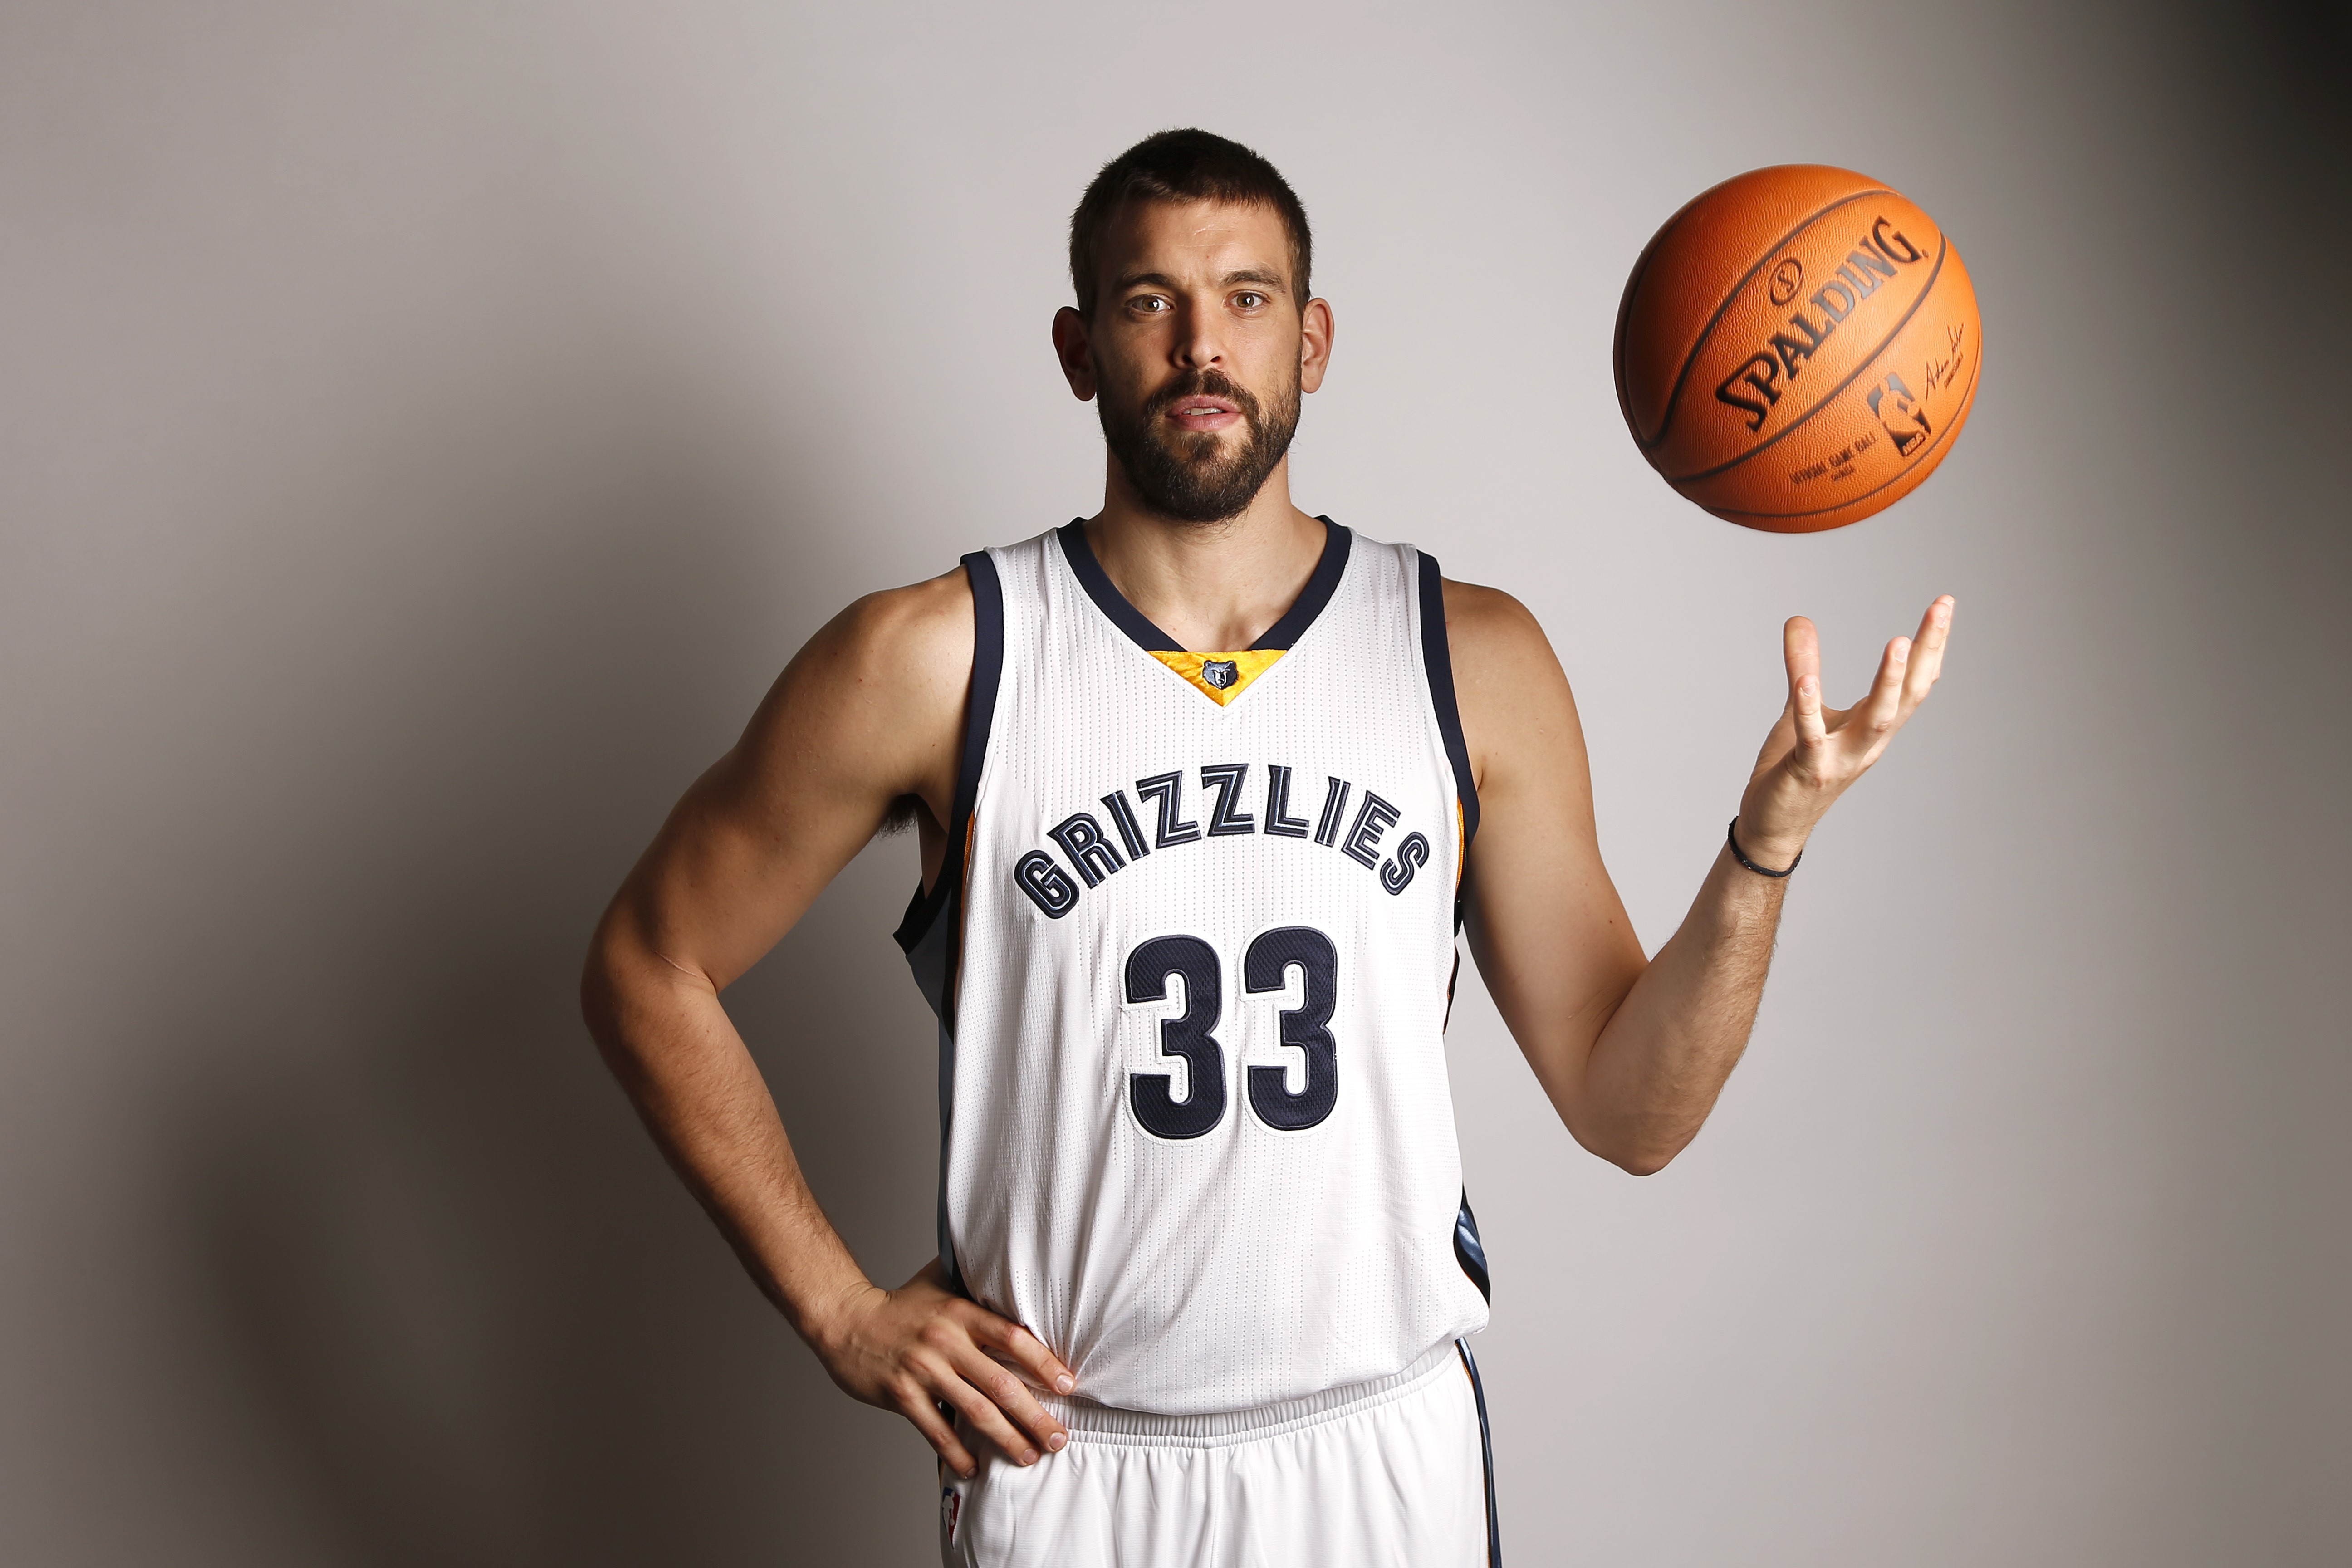 In this Sept. 29, 2014 photo, Memphis Grizzlies center Marc Gasol poses for a photo during the team's NBA basketball media day in Memphis, Tenn. (AP Photo/Mark Humphrey)